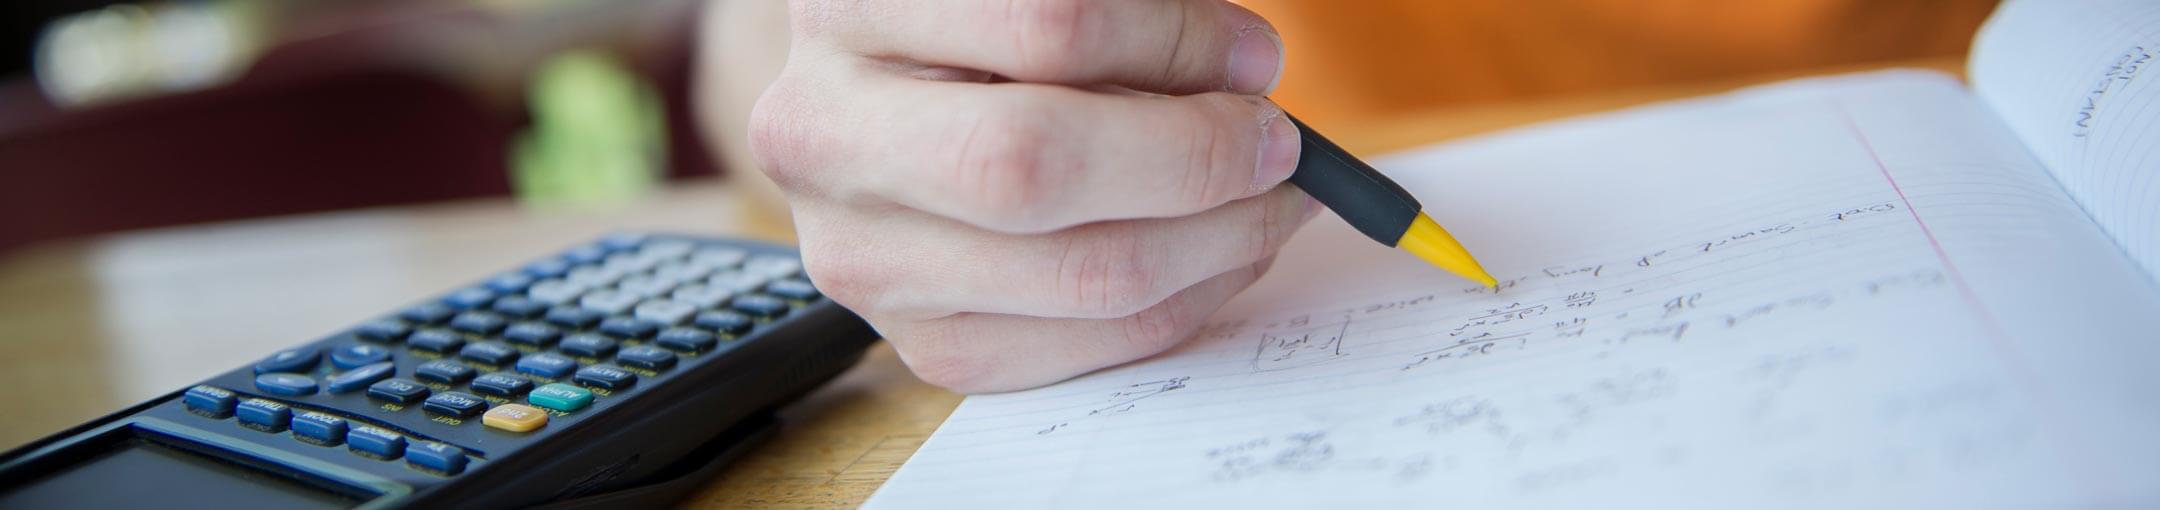 Close up of hand writing in a notebook with a mechanical pencil and a graphing calculator.